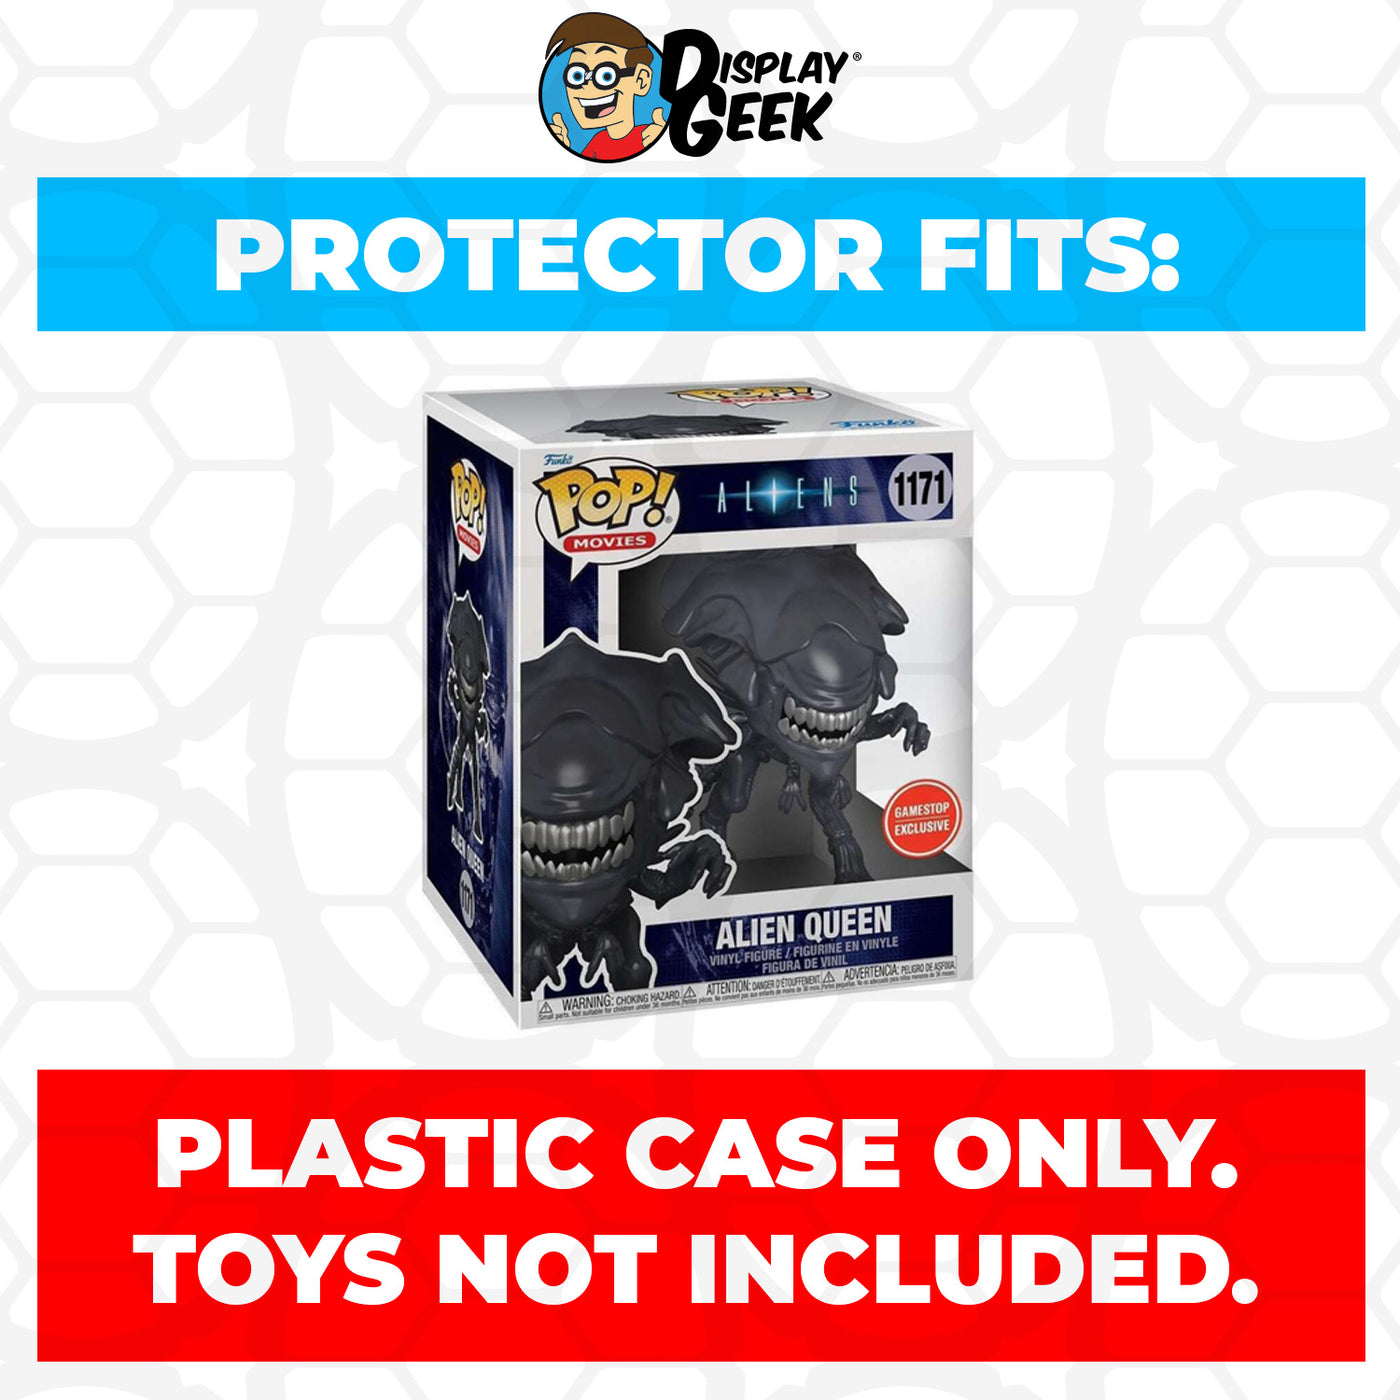 Pop Protector for 6 inch Alien Queen #1171 Super Funko Pop on The Protector Guide App by Display Geek